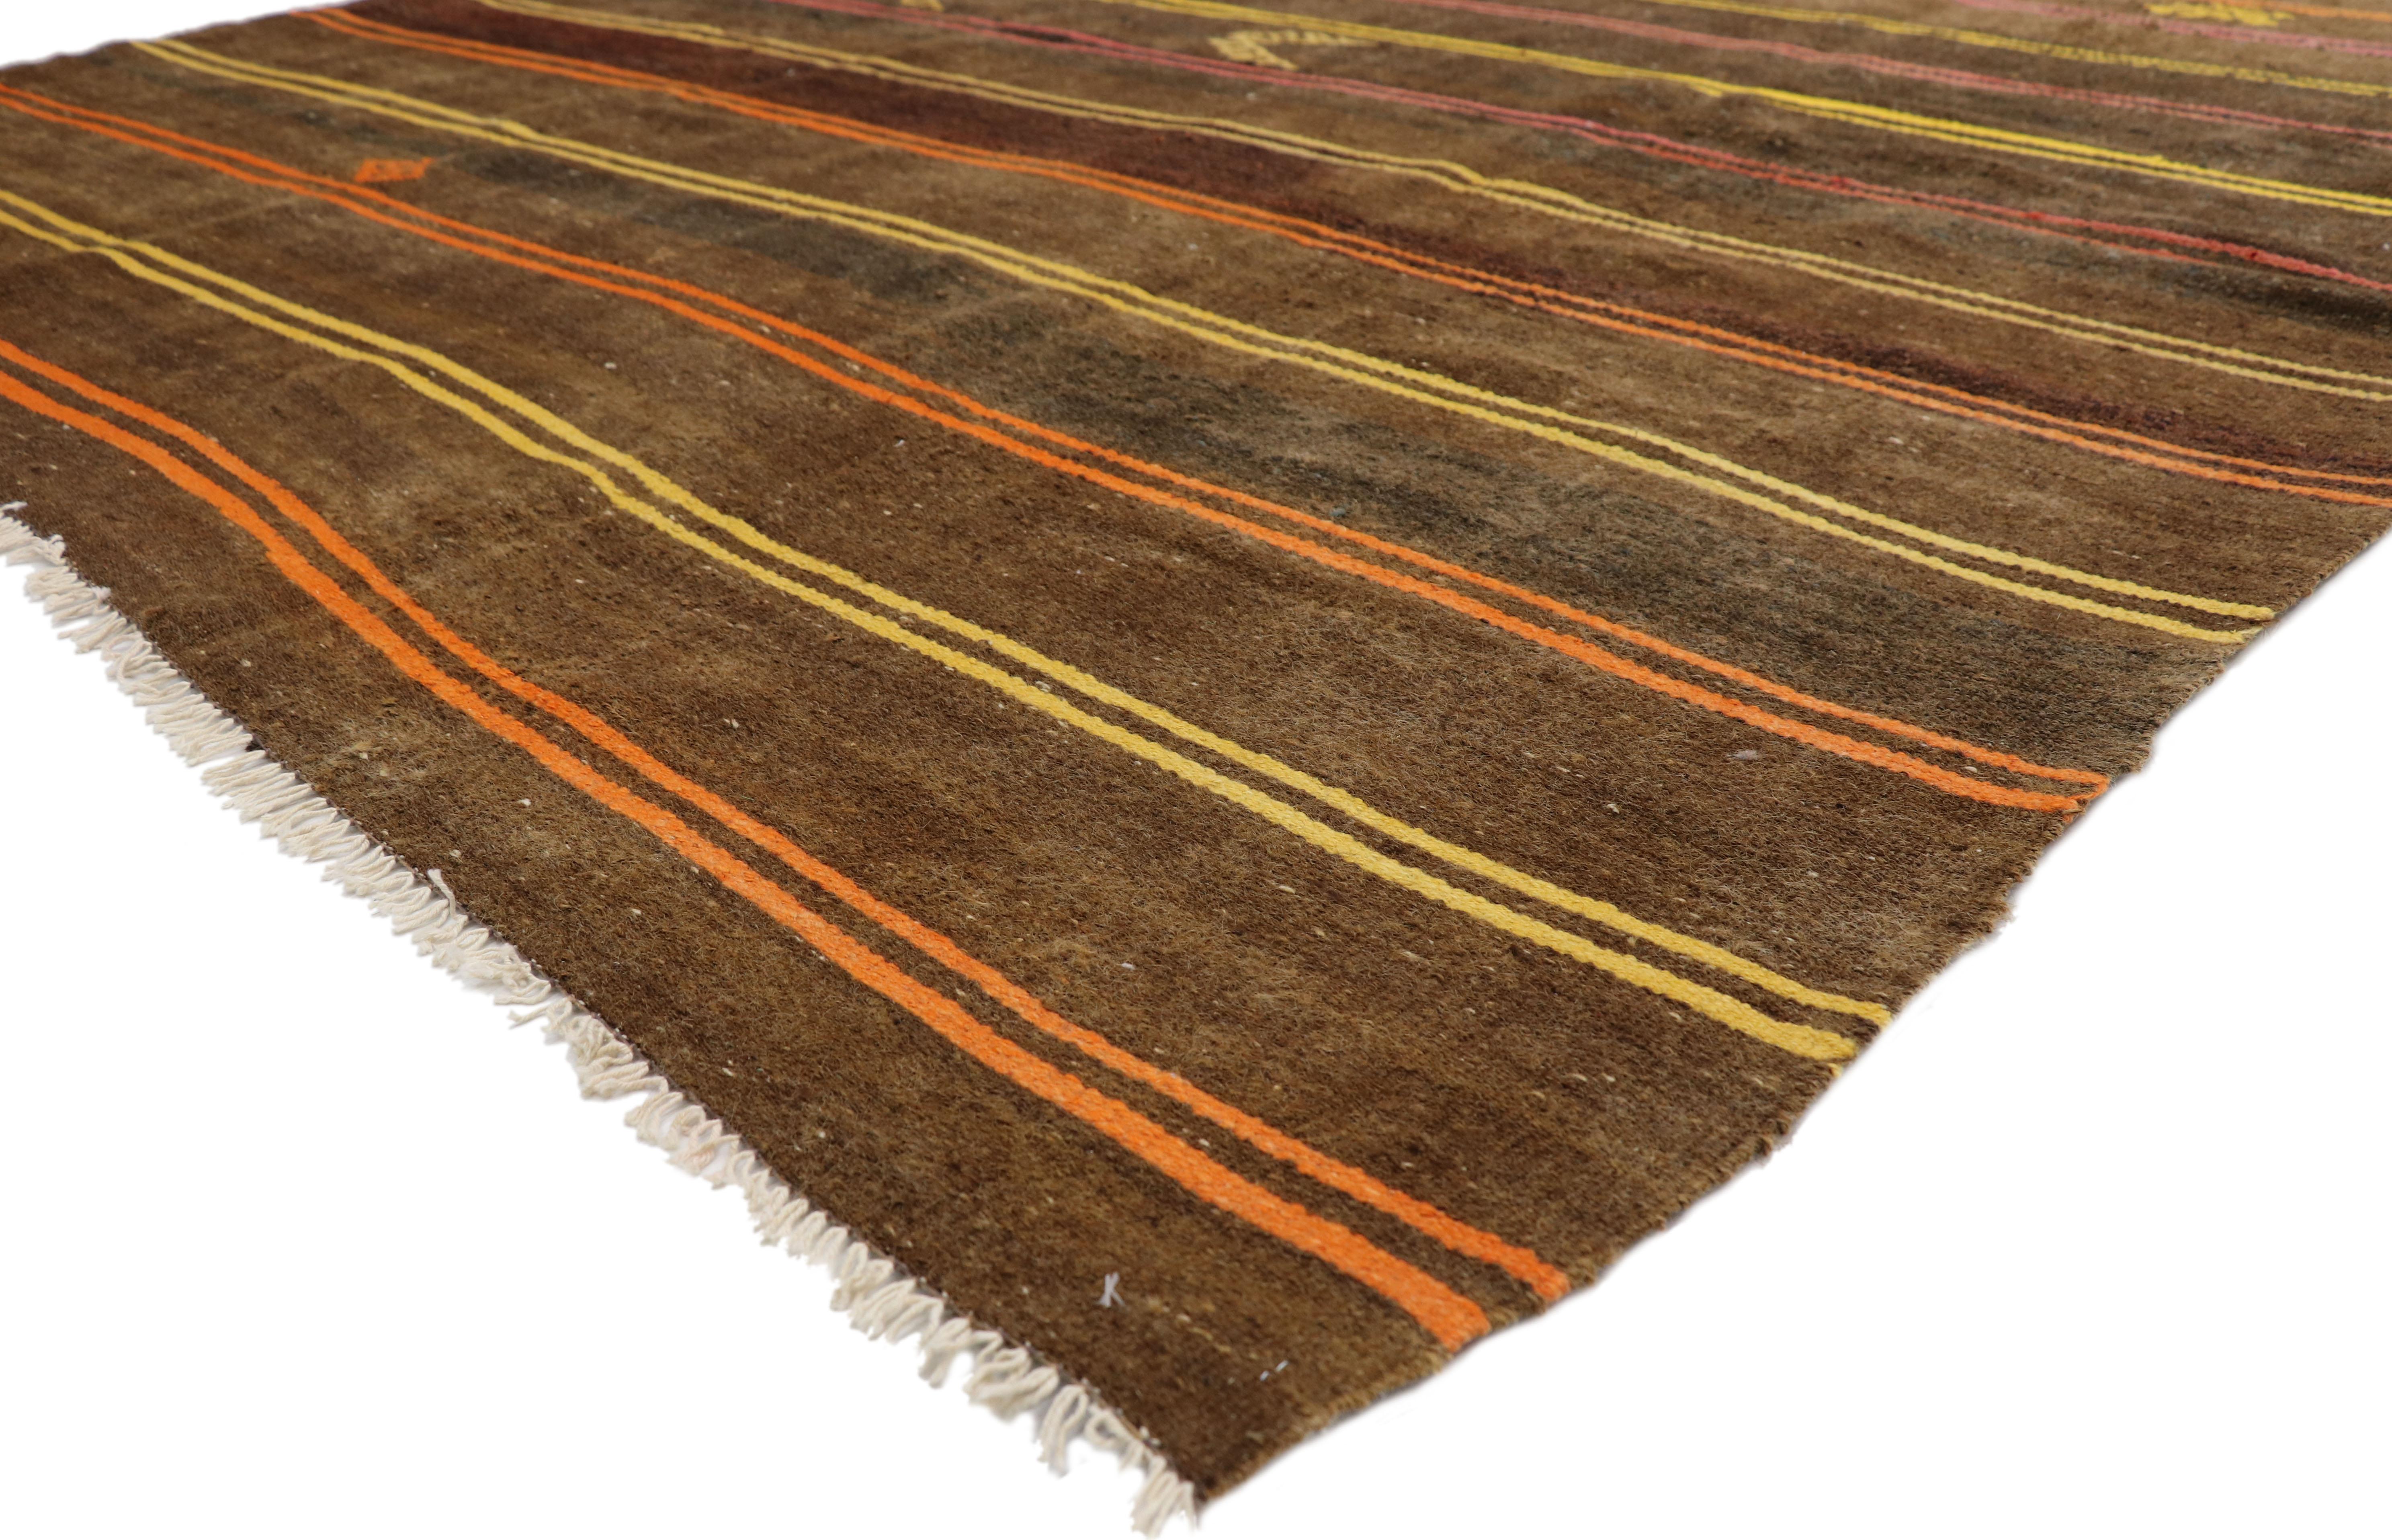 51321 vintage Turkish striped Kilim rug with Bohemian Tribal style, flat-weave rug. This hand woven wool vintage Turkish striped Kilim rug features double colored bands in alternating colors dotted with a few symbolic Turkish motifs on a warm brown